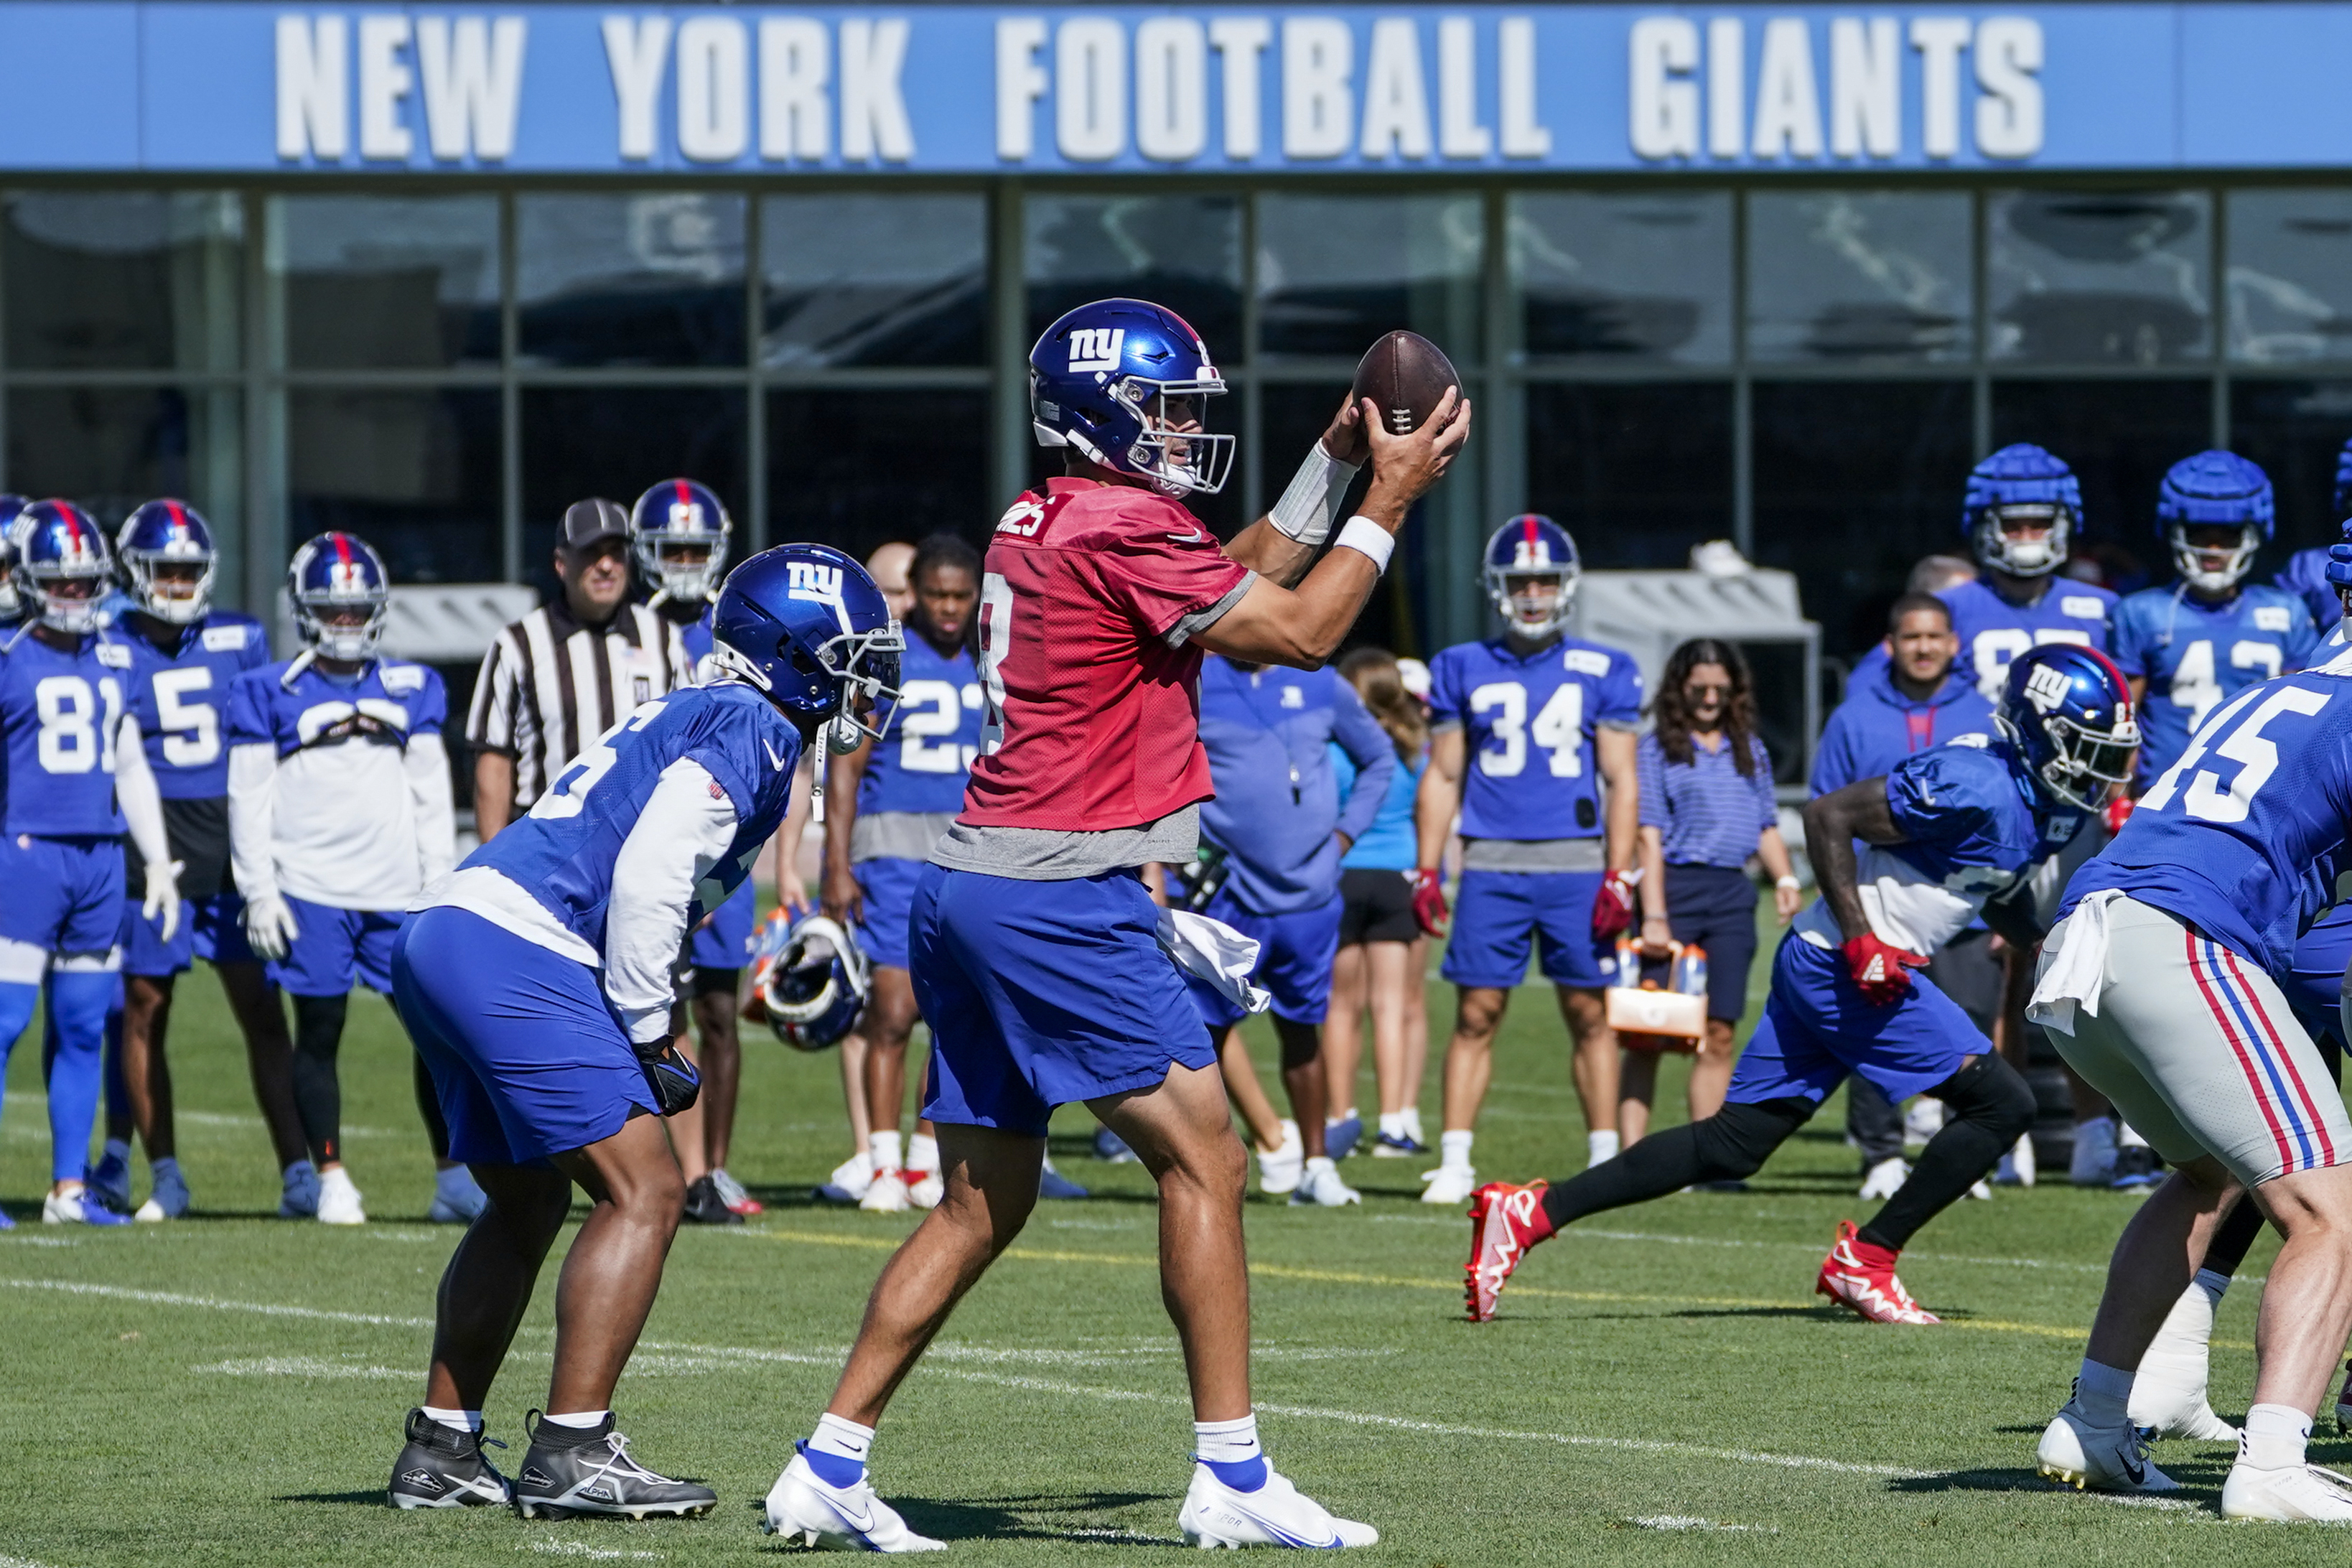 Charitybuzz: 2 NY Giants 2022-23 Pre-Game On-Field Sideline Passes